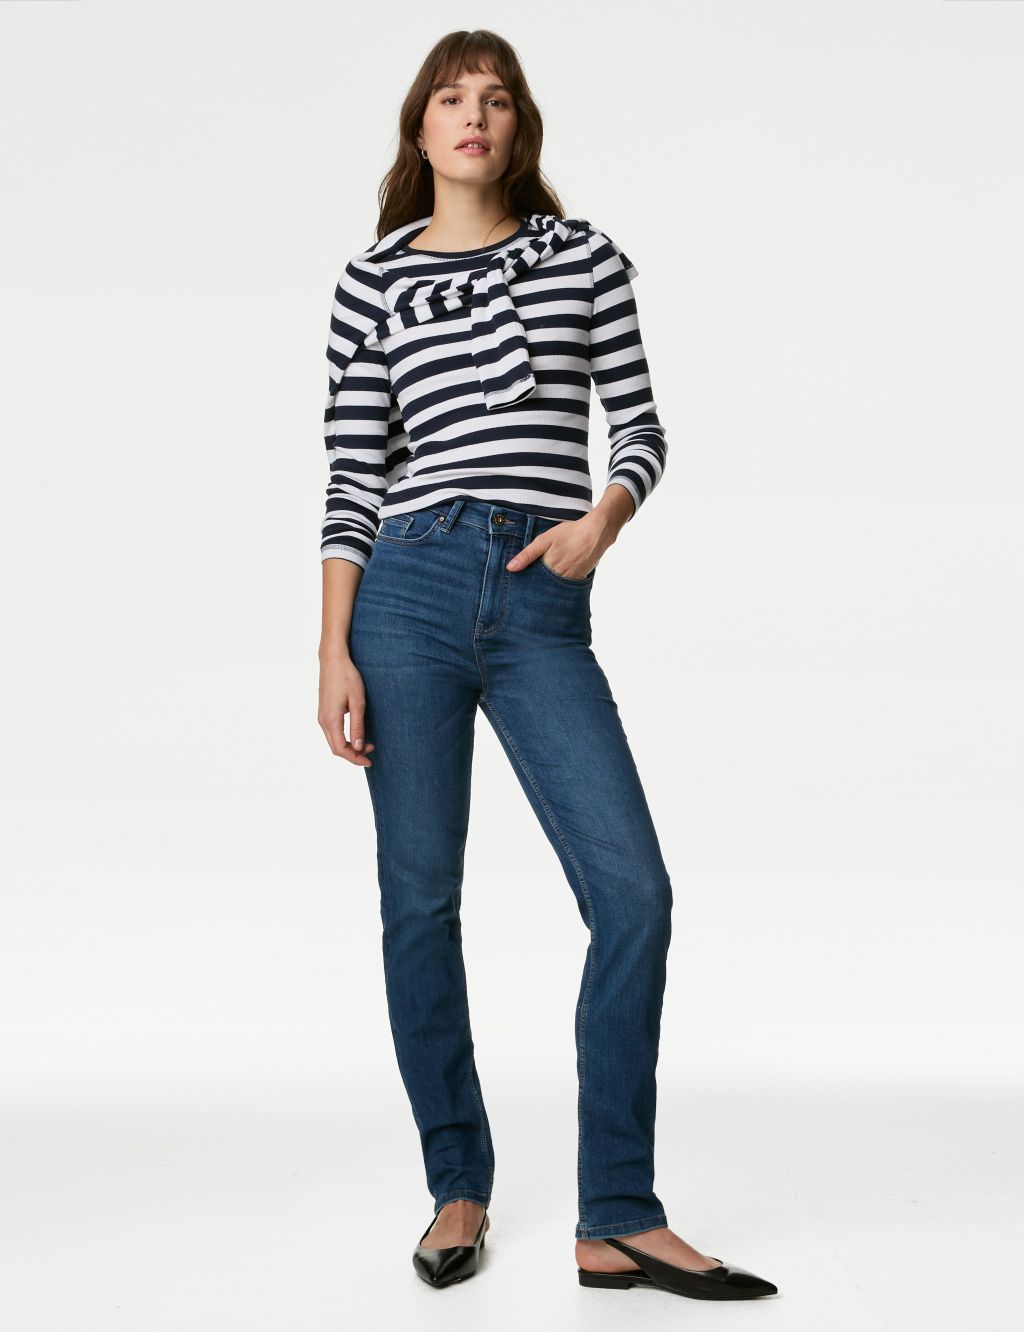 Sienna Supersoft Straight Leg Jeans image 1